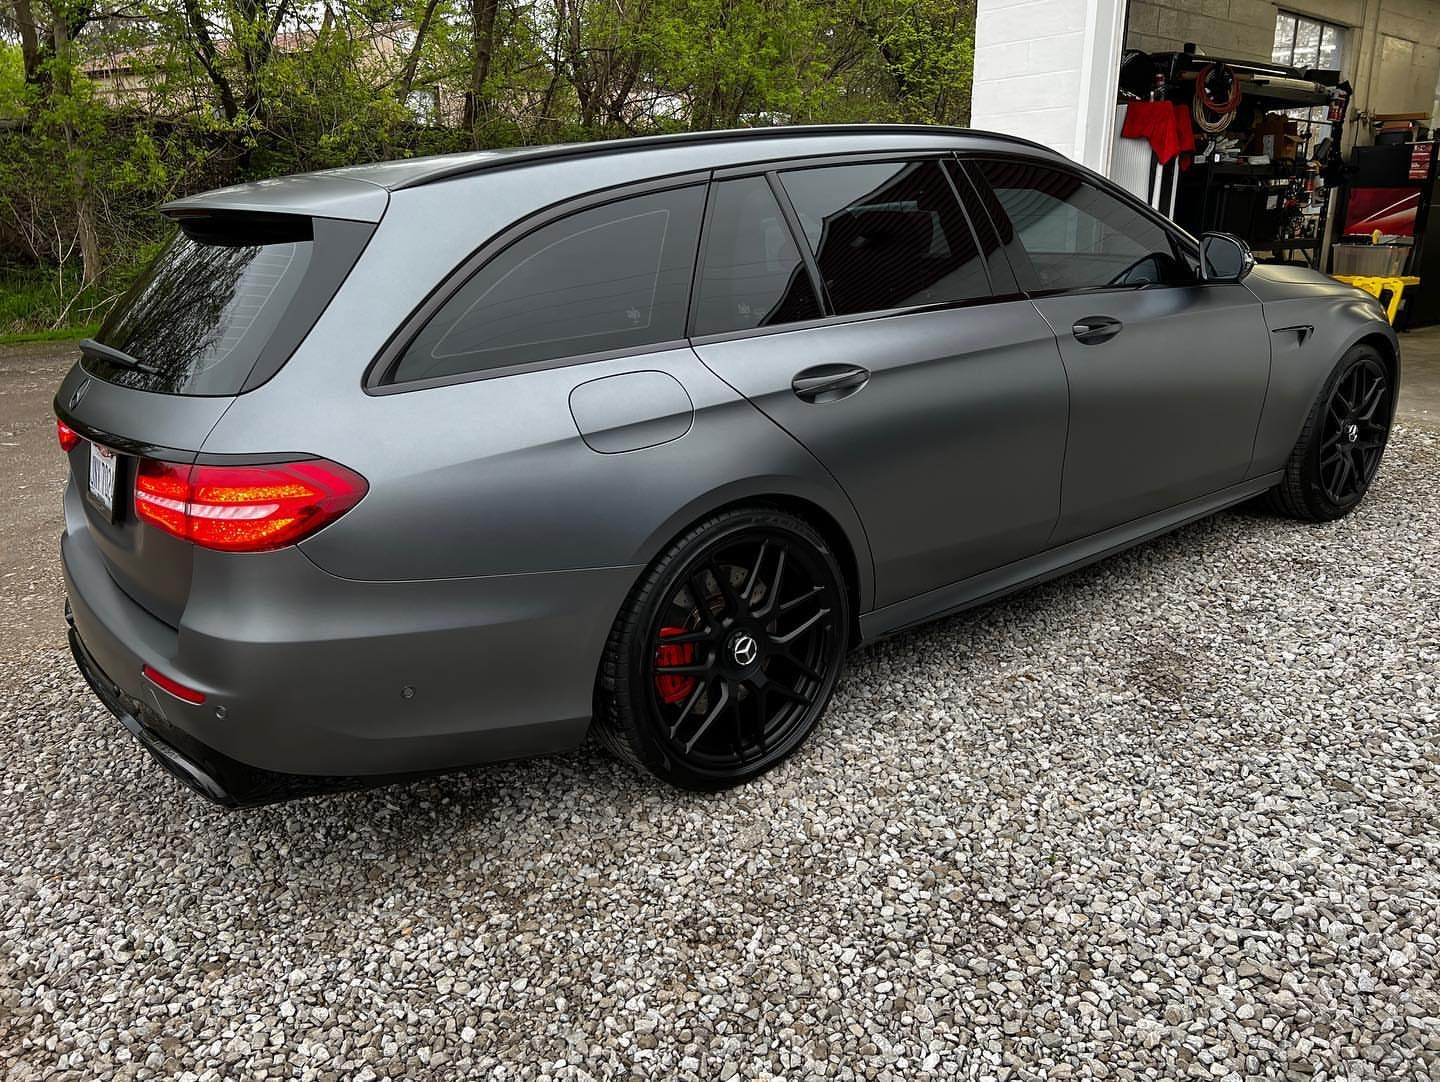 2019 Mercedes-Benz E63 AMG S - 2019 E63 AMG S Wagon - Selenite Grey Magno - LOW MILES - Used - VIN WDDZH8KB1KA680250 - 14,228 Miles - 8 cyl - AWD - Automatic - Wagon - Gray - Cleveland, OH 44106, United States